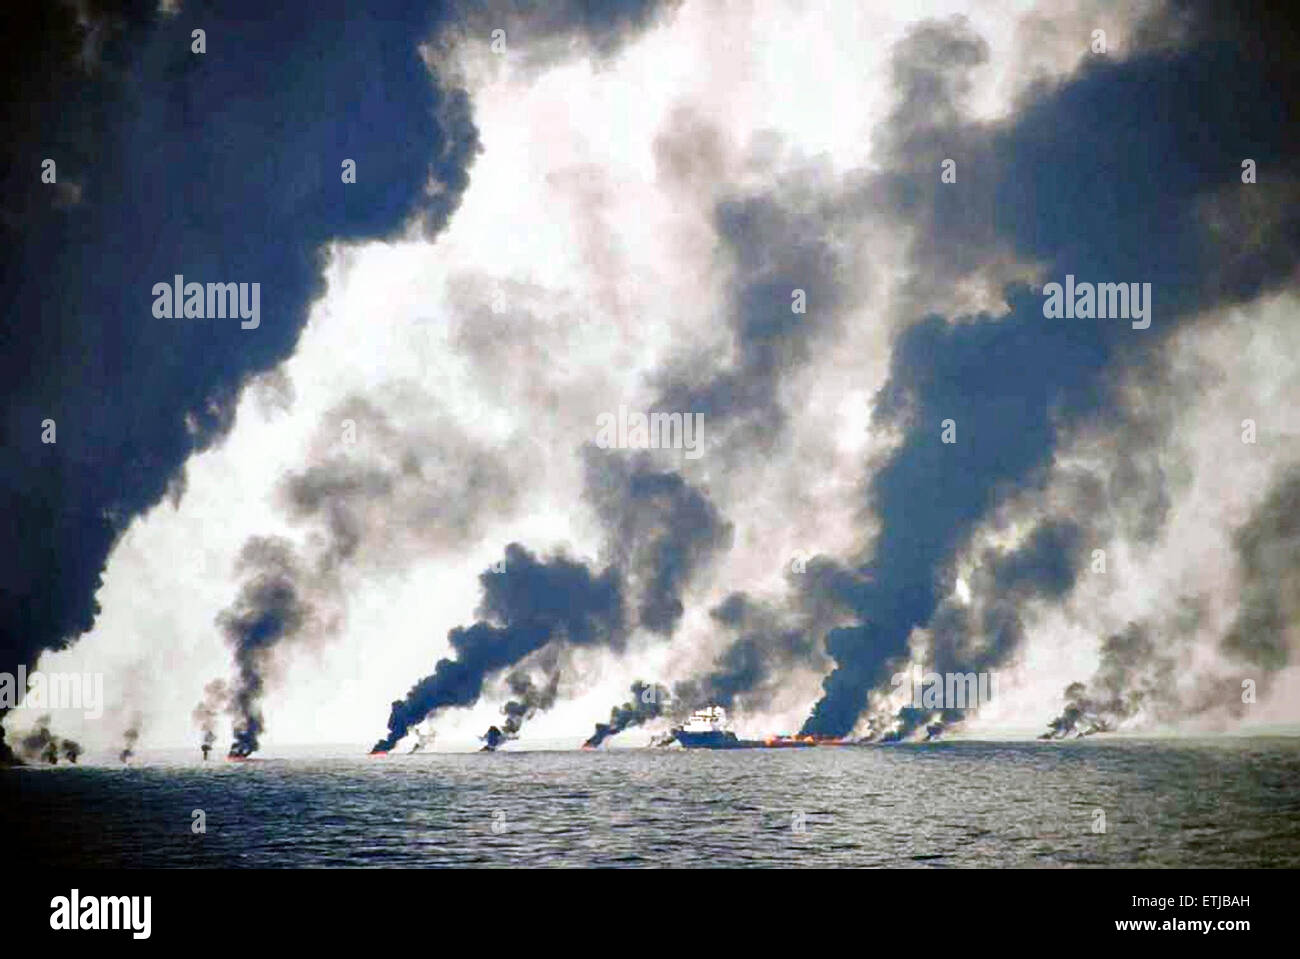 Dark clouds fill the sky as shrimp boats use a boom to gather crude oil during a controlled surface burn following the BP Deepwater Horizon oil spill disaster as efforts to contain and clean the millions of gallons of crew continue June 19, 2010 in the Gulf of Mexico. Stock Photo